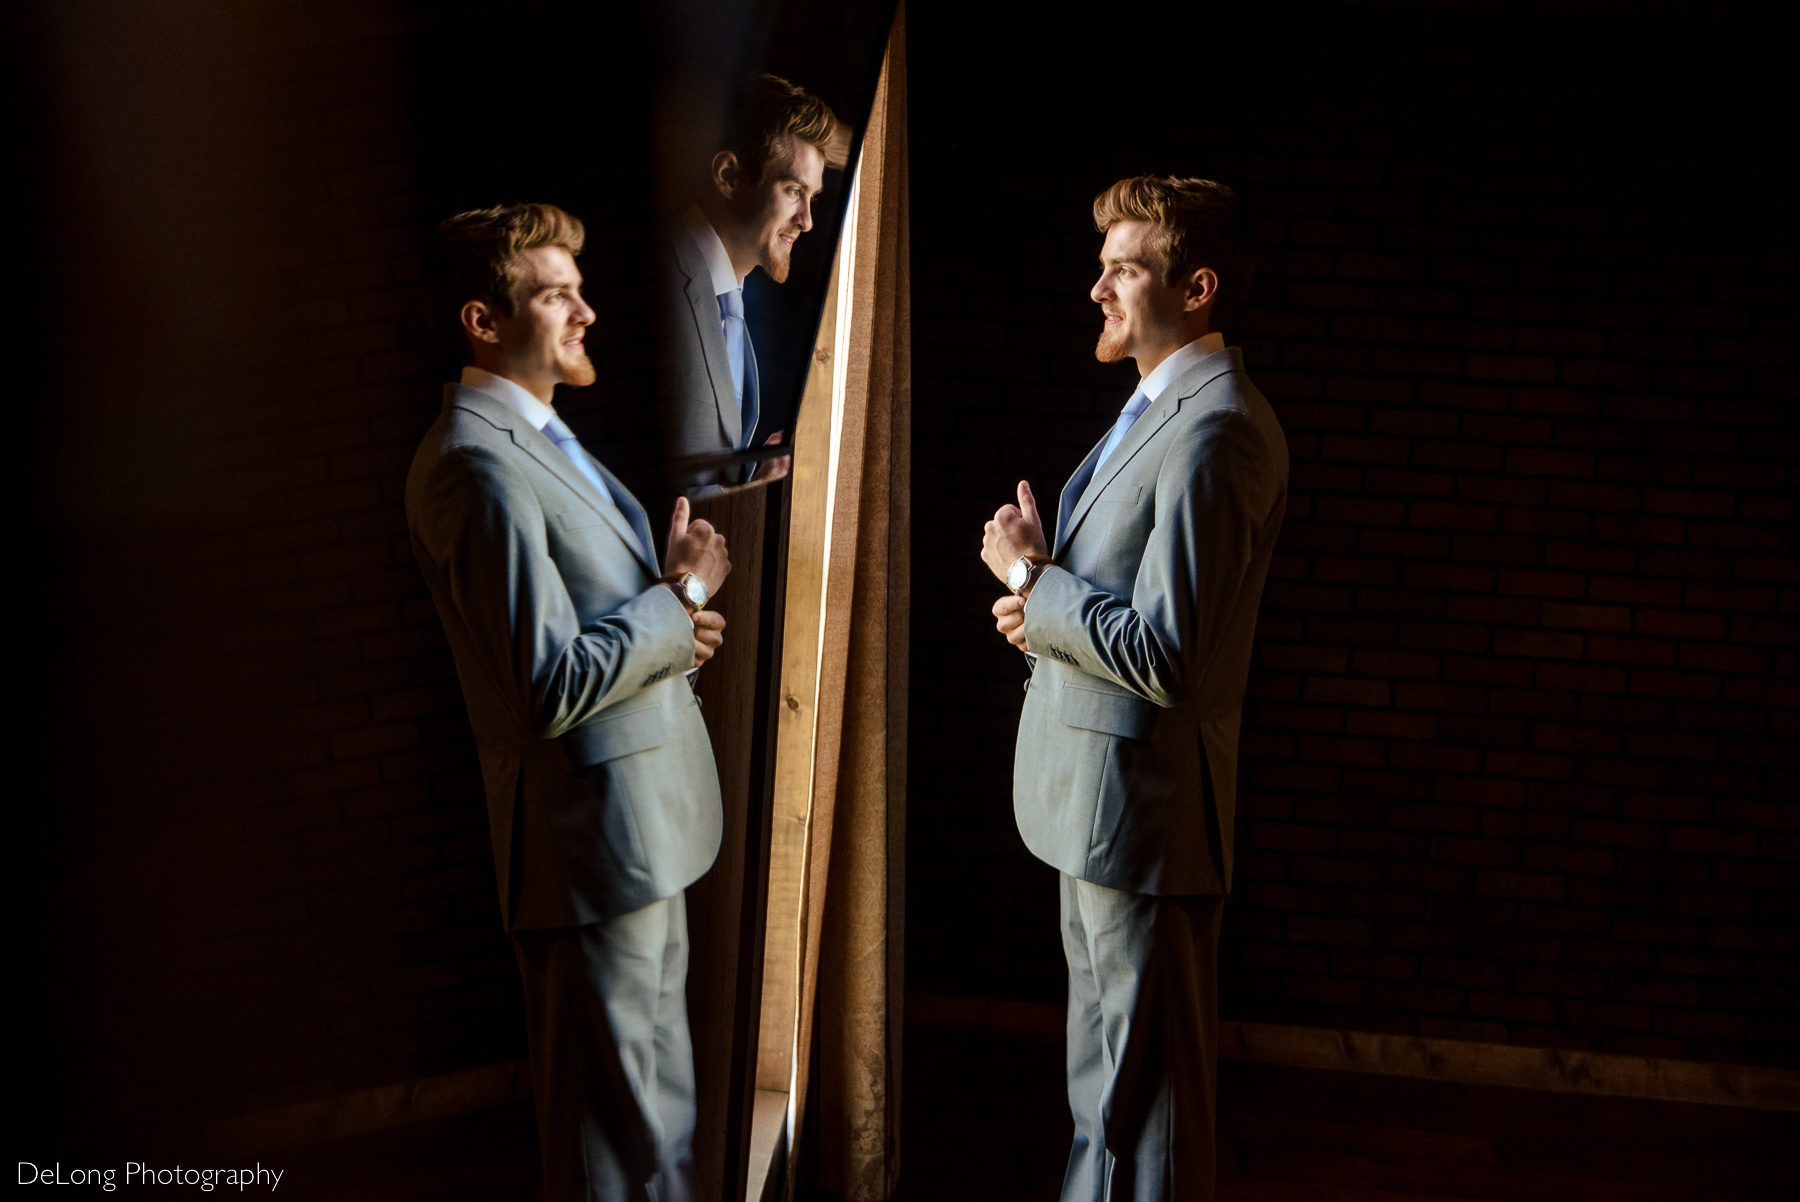 Triple reflection of groom in the groom's suite at by Charlotte Wedding Photographers DeLong Photography